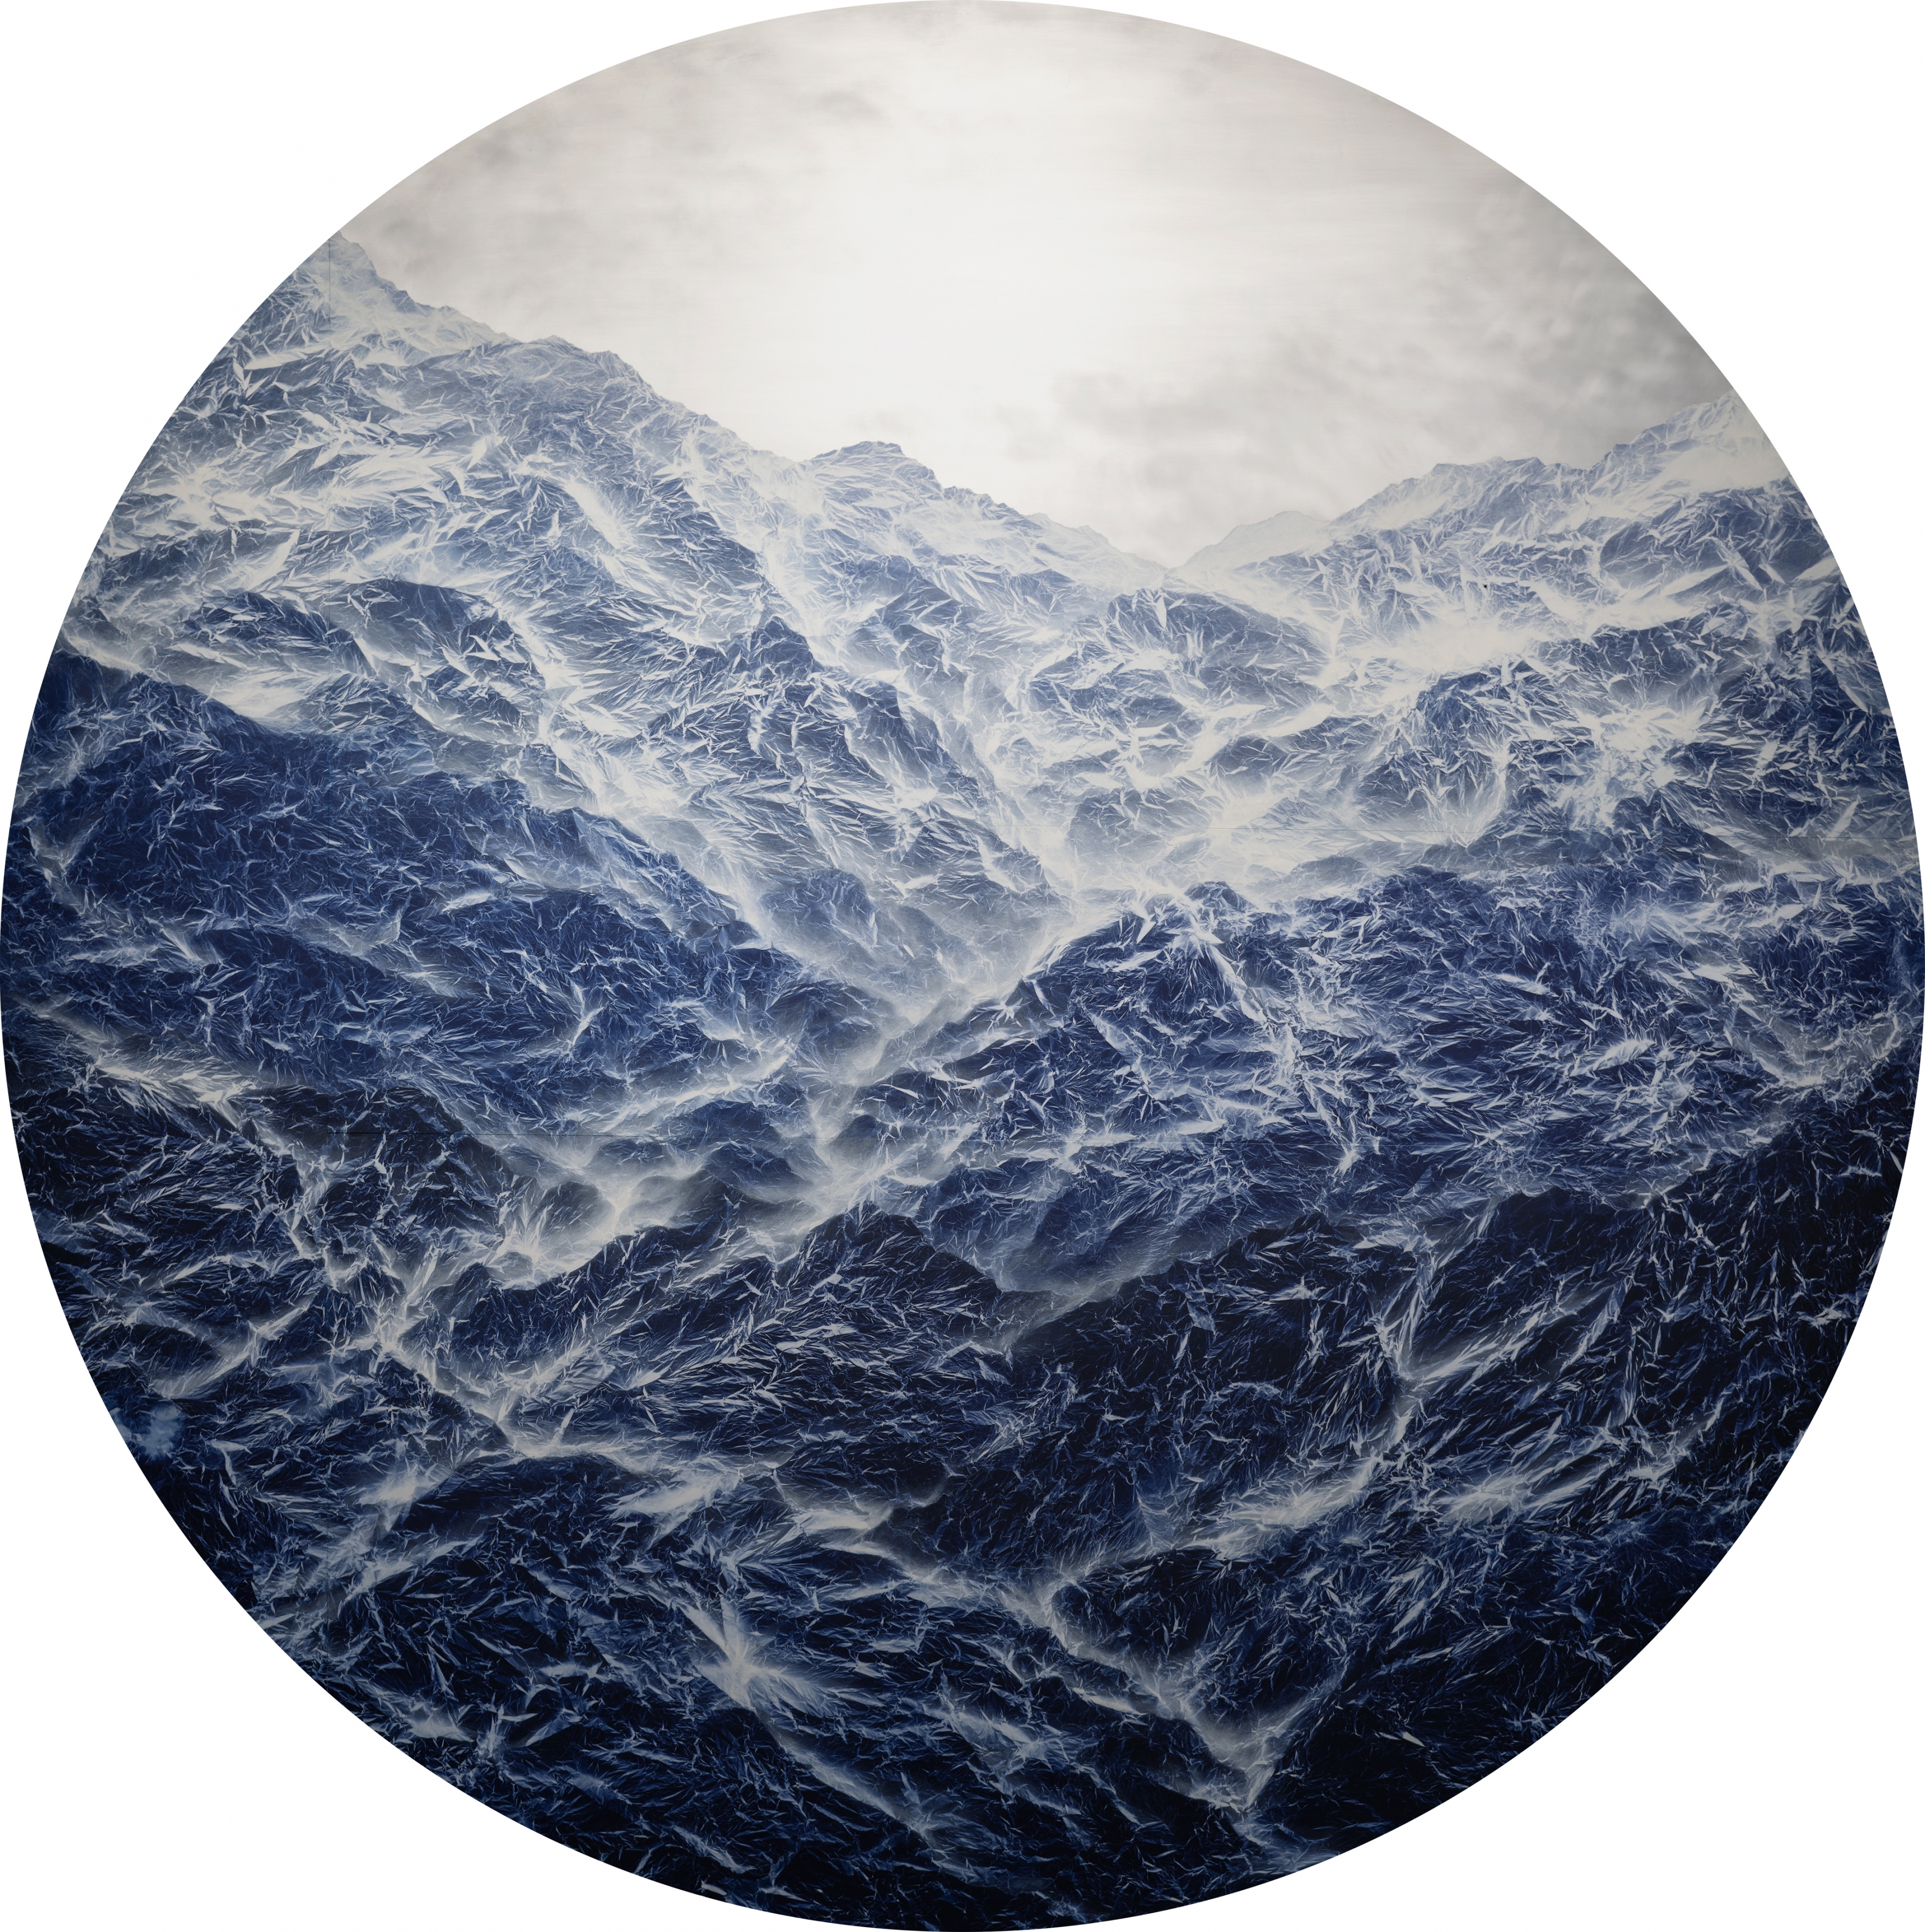 &nbsp;


Wu Chi-Tsung
Cyano-Collage 121, 2021
cyanotype photography, Xuan paper, acrylic gel, acrylic, mounted on aluminum board in four parts
diameter: 141 3/4 inches (360 cm)
(WCT-42.A-D)
&nbsp;